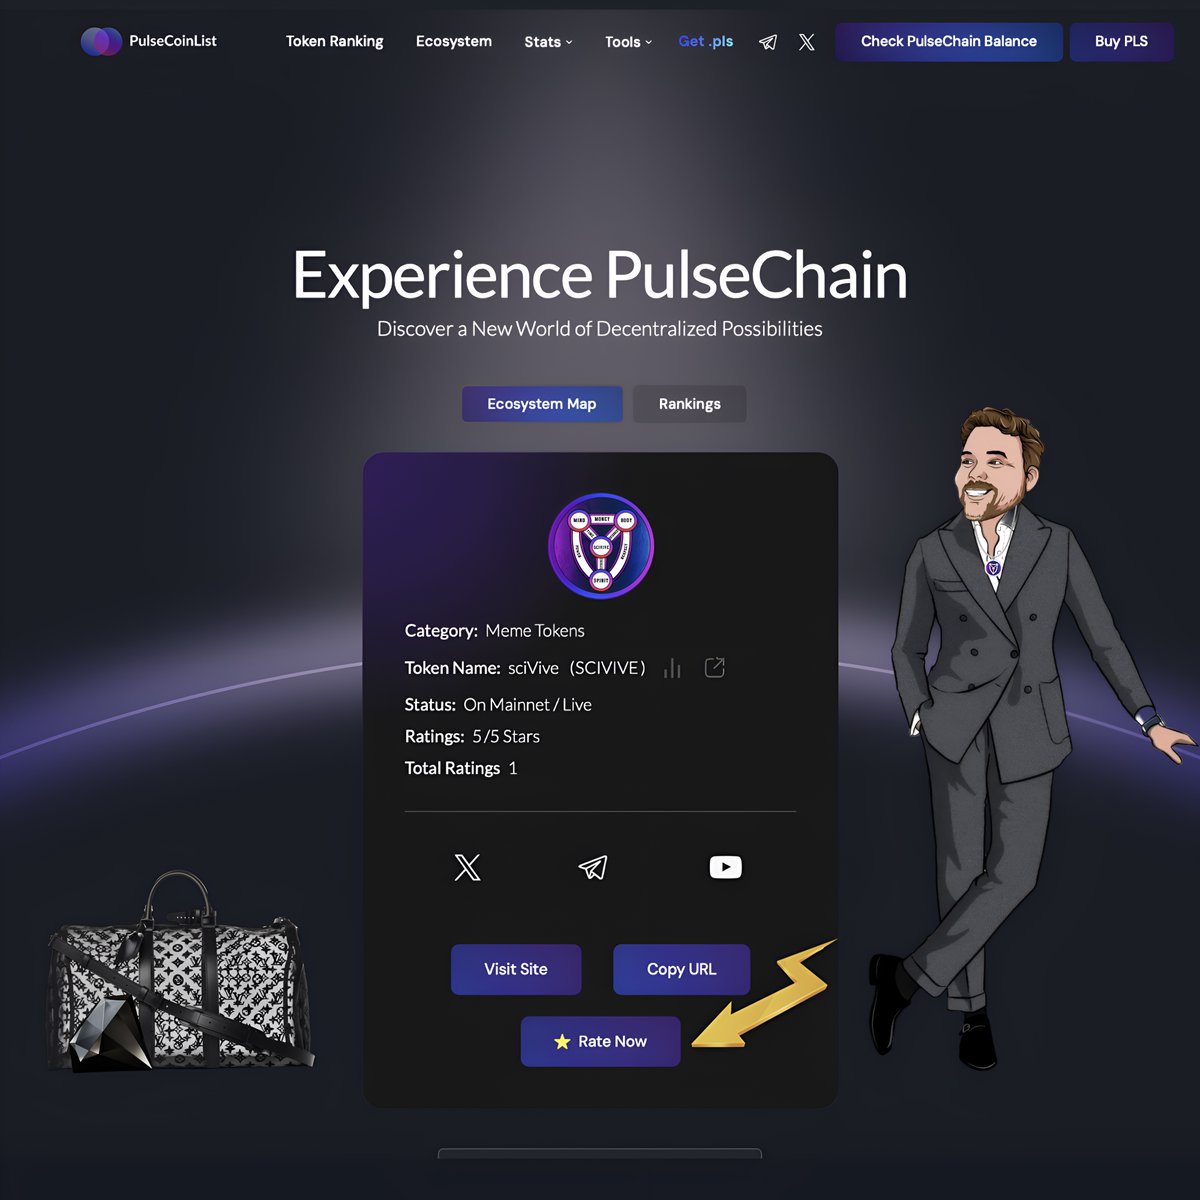 🔮 Big shoutout to @PulseCoinList for the new rating system, it’s a nice touch! 🔮 Let’s show our support by dropping some solid feedback about the $sciVive project. ✍️💌💜 Remember, we’re a decentralized powerhouse, so let’s roll up our sleeves and make it blast off to the…